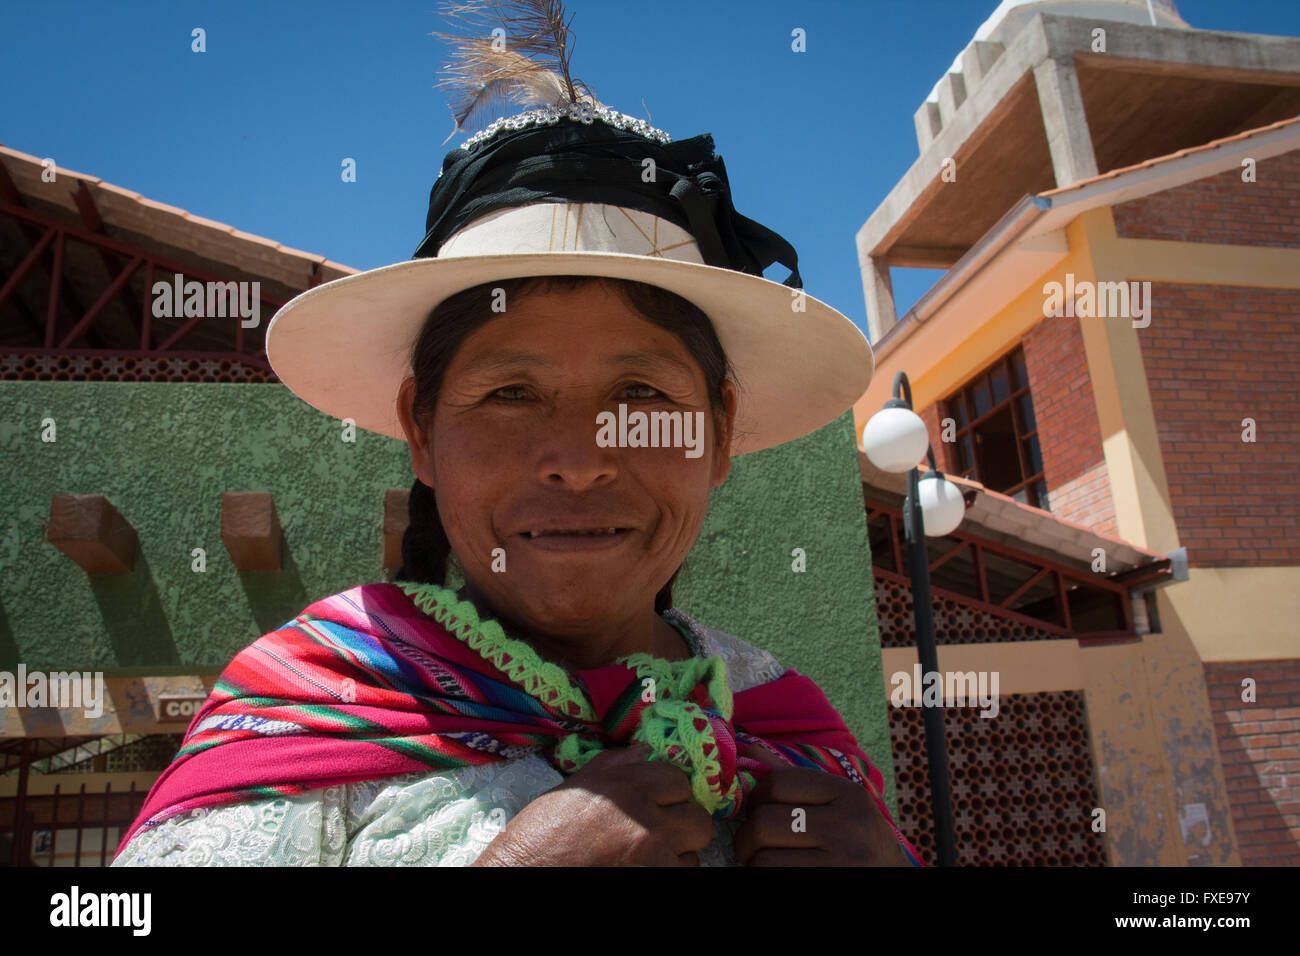 Bolivia, a portrait of a smiling woman outside in front of her house. Stock Photo